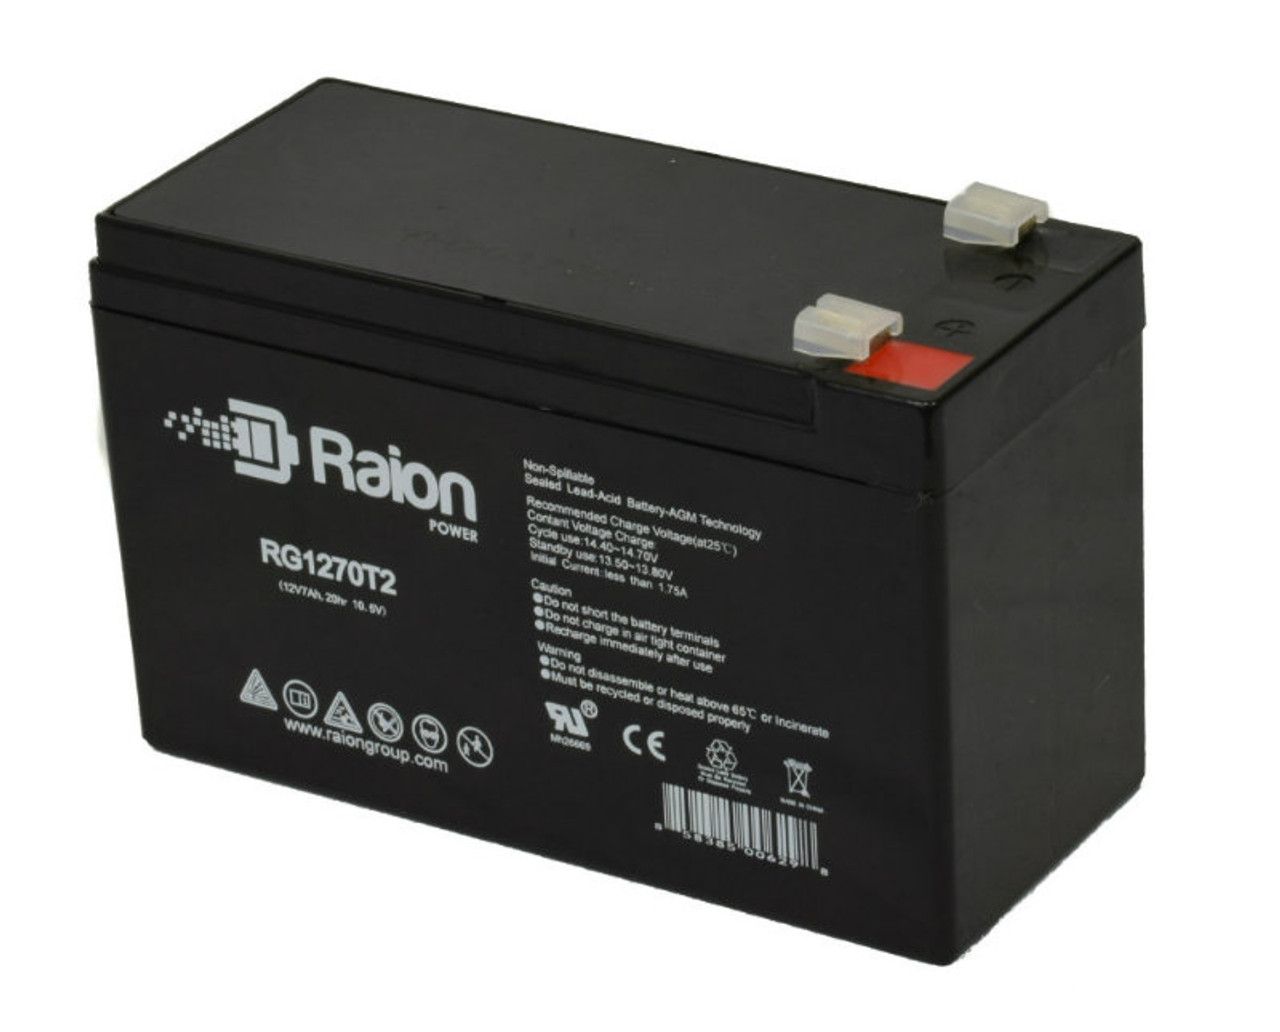 Raion Power Replacement 12V 7Ah RG1270T1 Fire Alarm Battery for Altronix SMP7PMP16